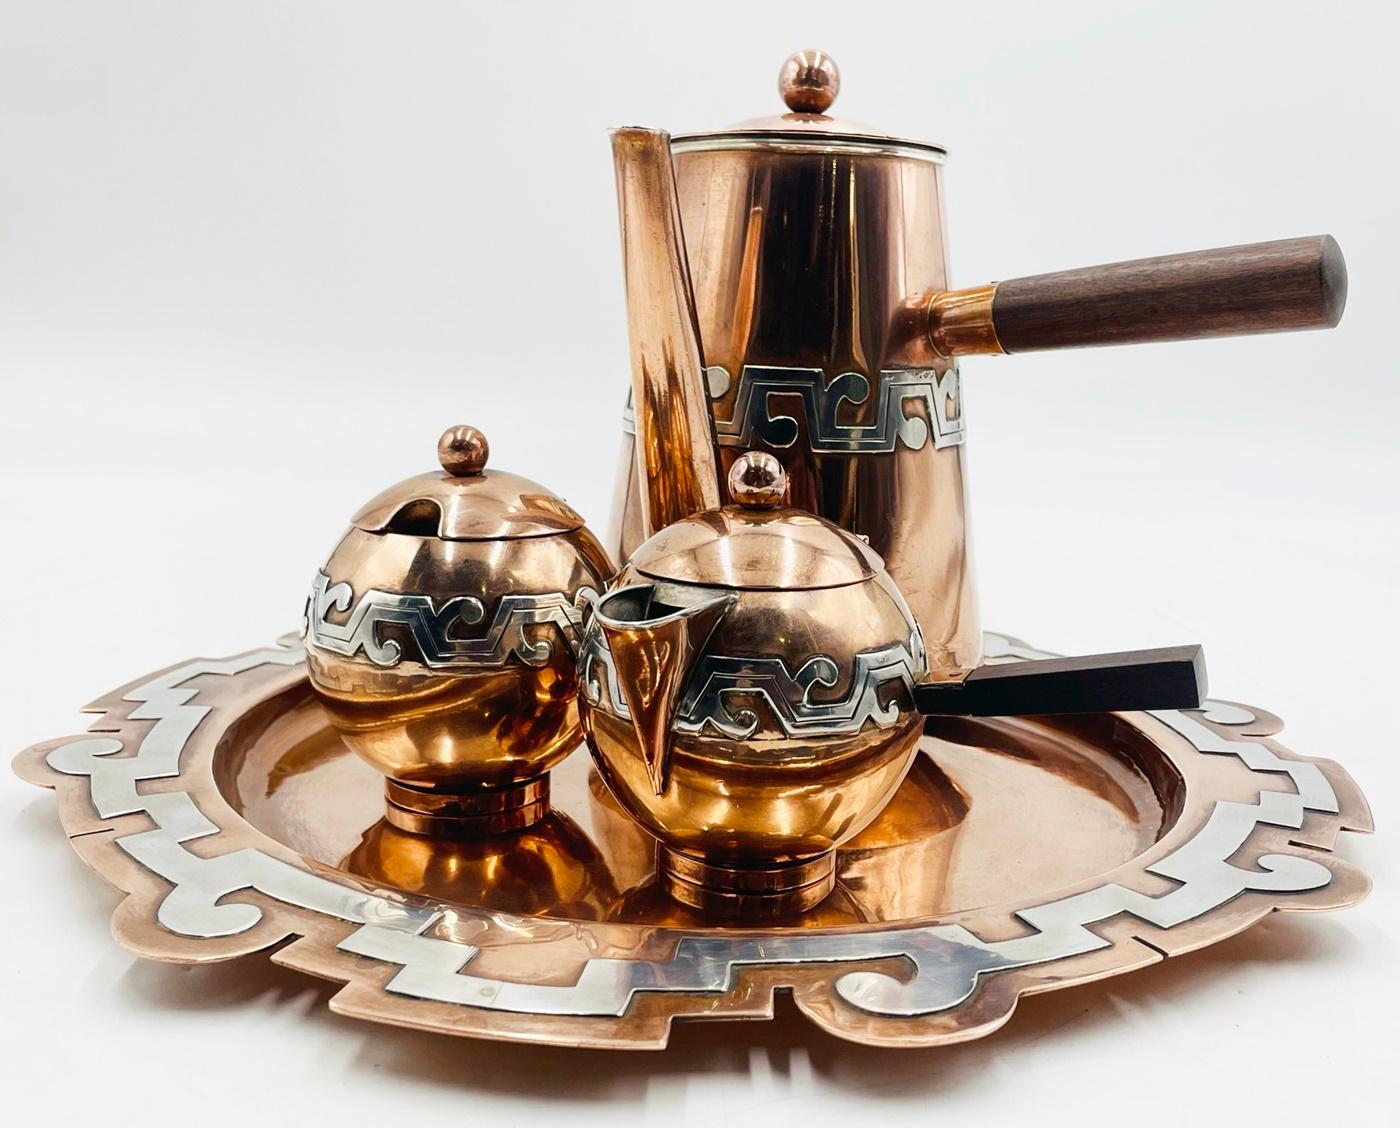 Introducing the remarkable Copper & Silver Coffee/Tea Service by Ana Maria Nunez De Brilanti for Plateria Victoria, Mexico 1960's. Immerse yourself in the rich heritage of Mexican craftsmanship with this exquisite set, meticulously handcrafted to